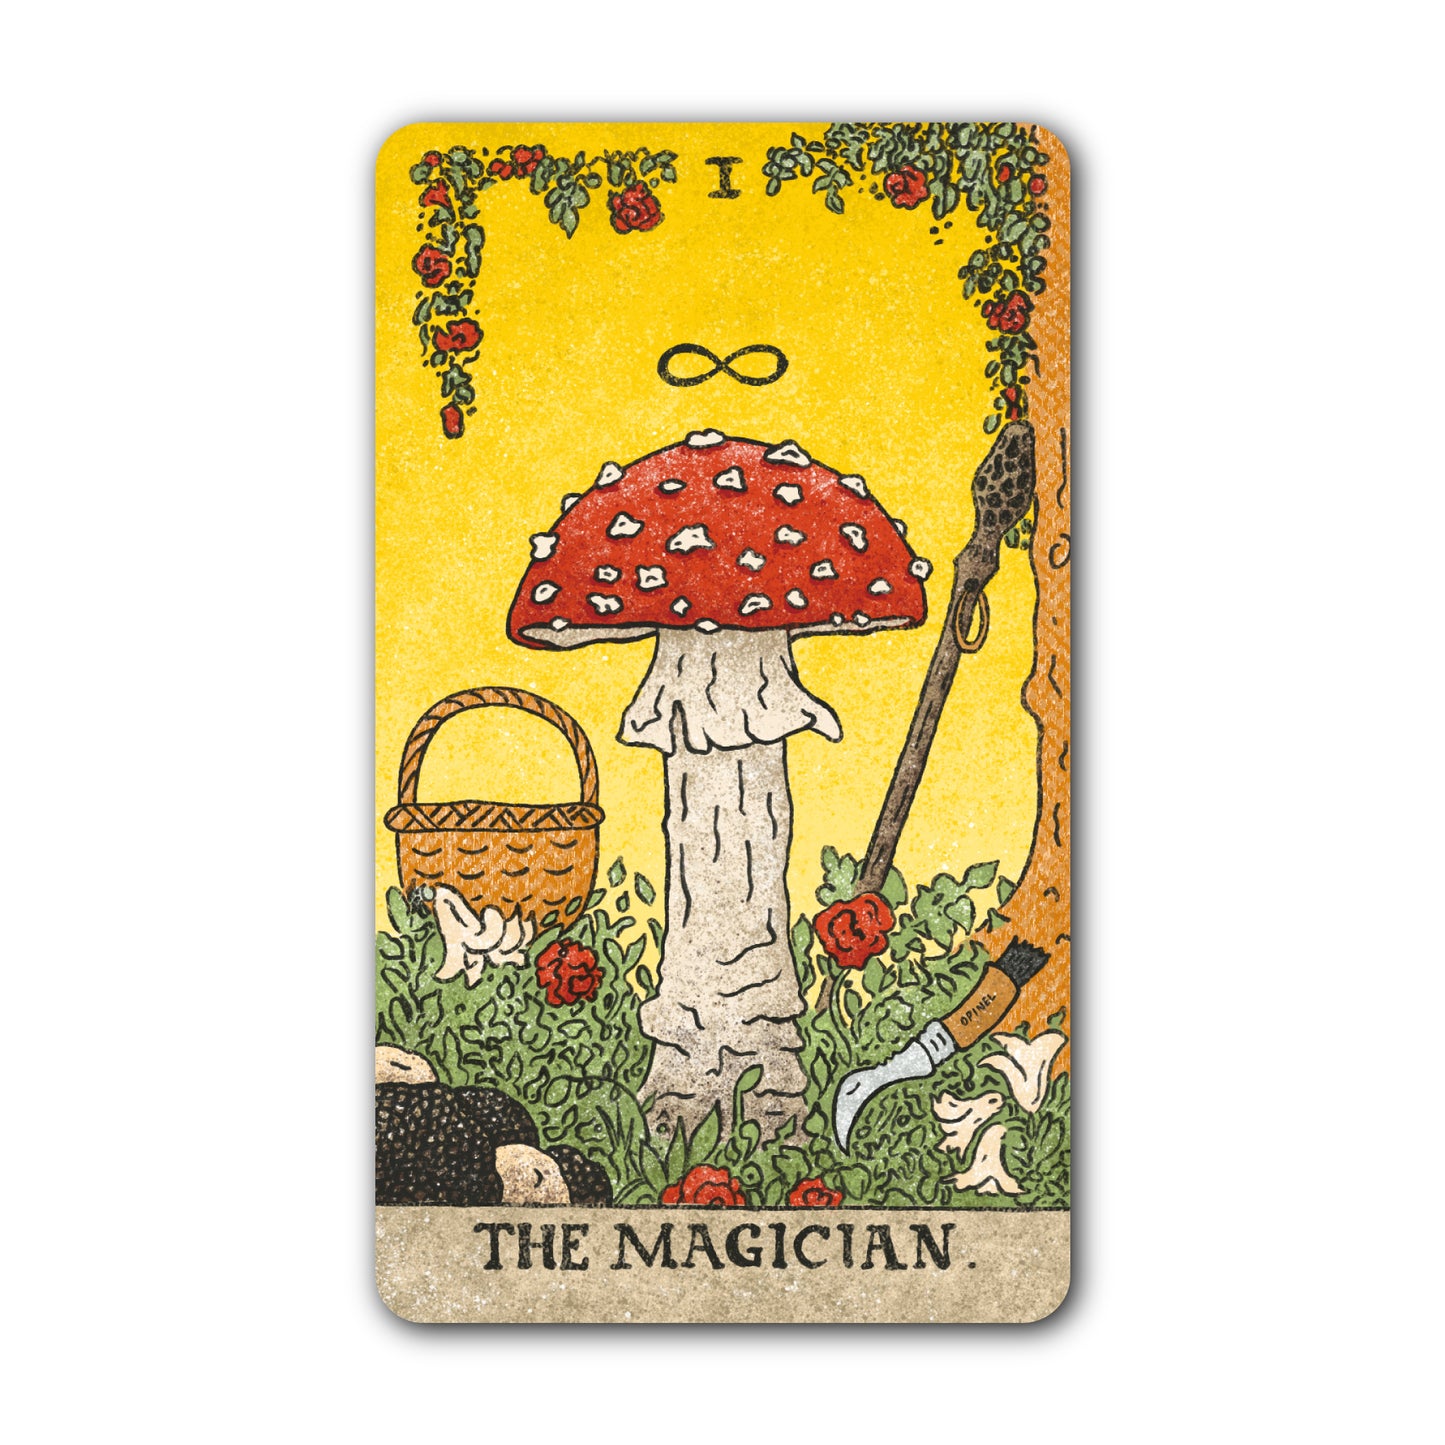 Individual Stickers of Cards from the Mushroom Hunter’s Tarot